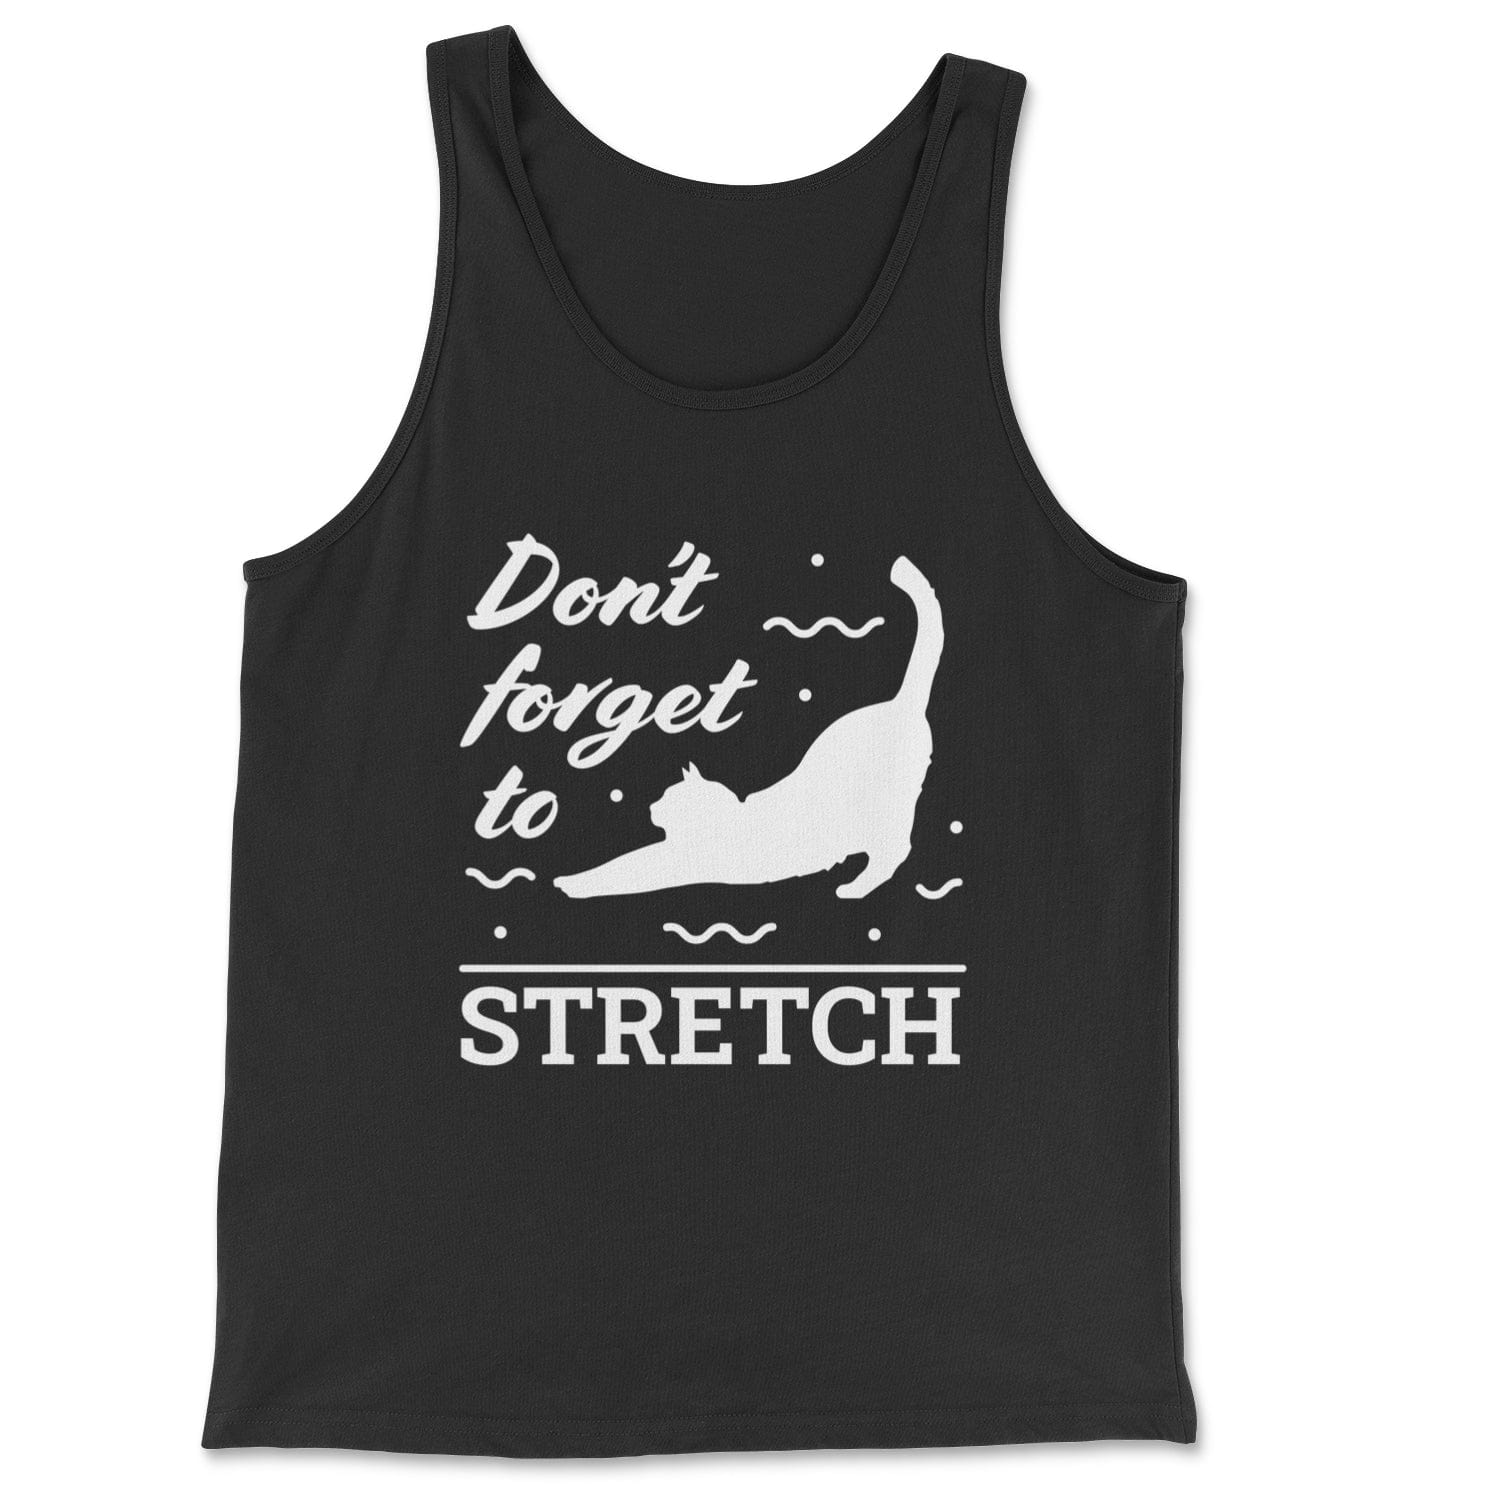 Don't Forget to Stretch - Classic Tank Skyba Print Material